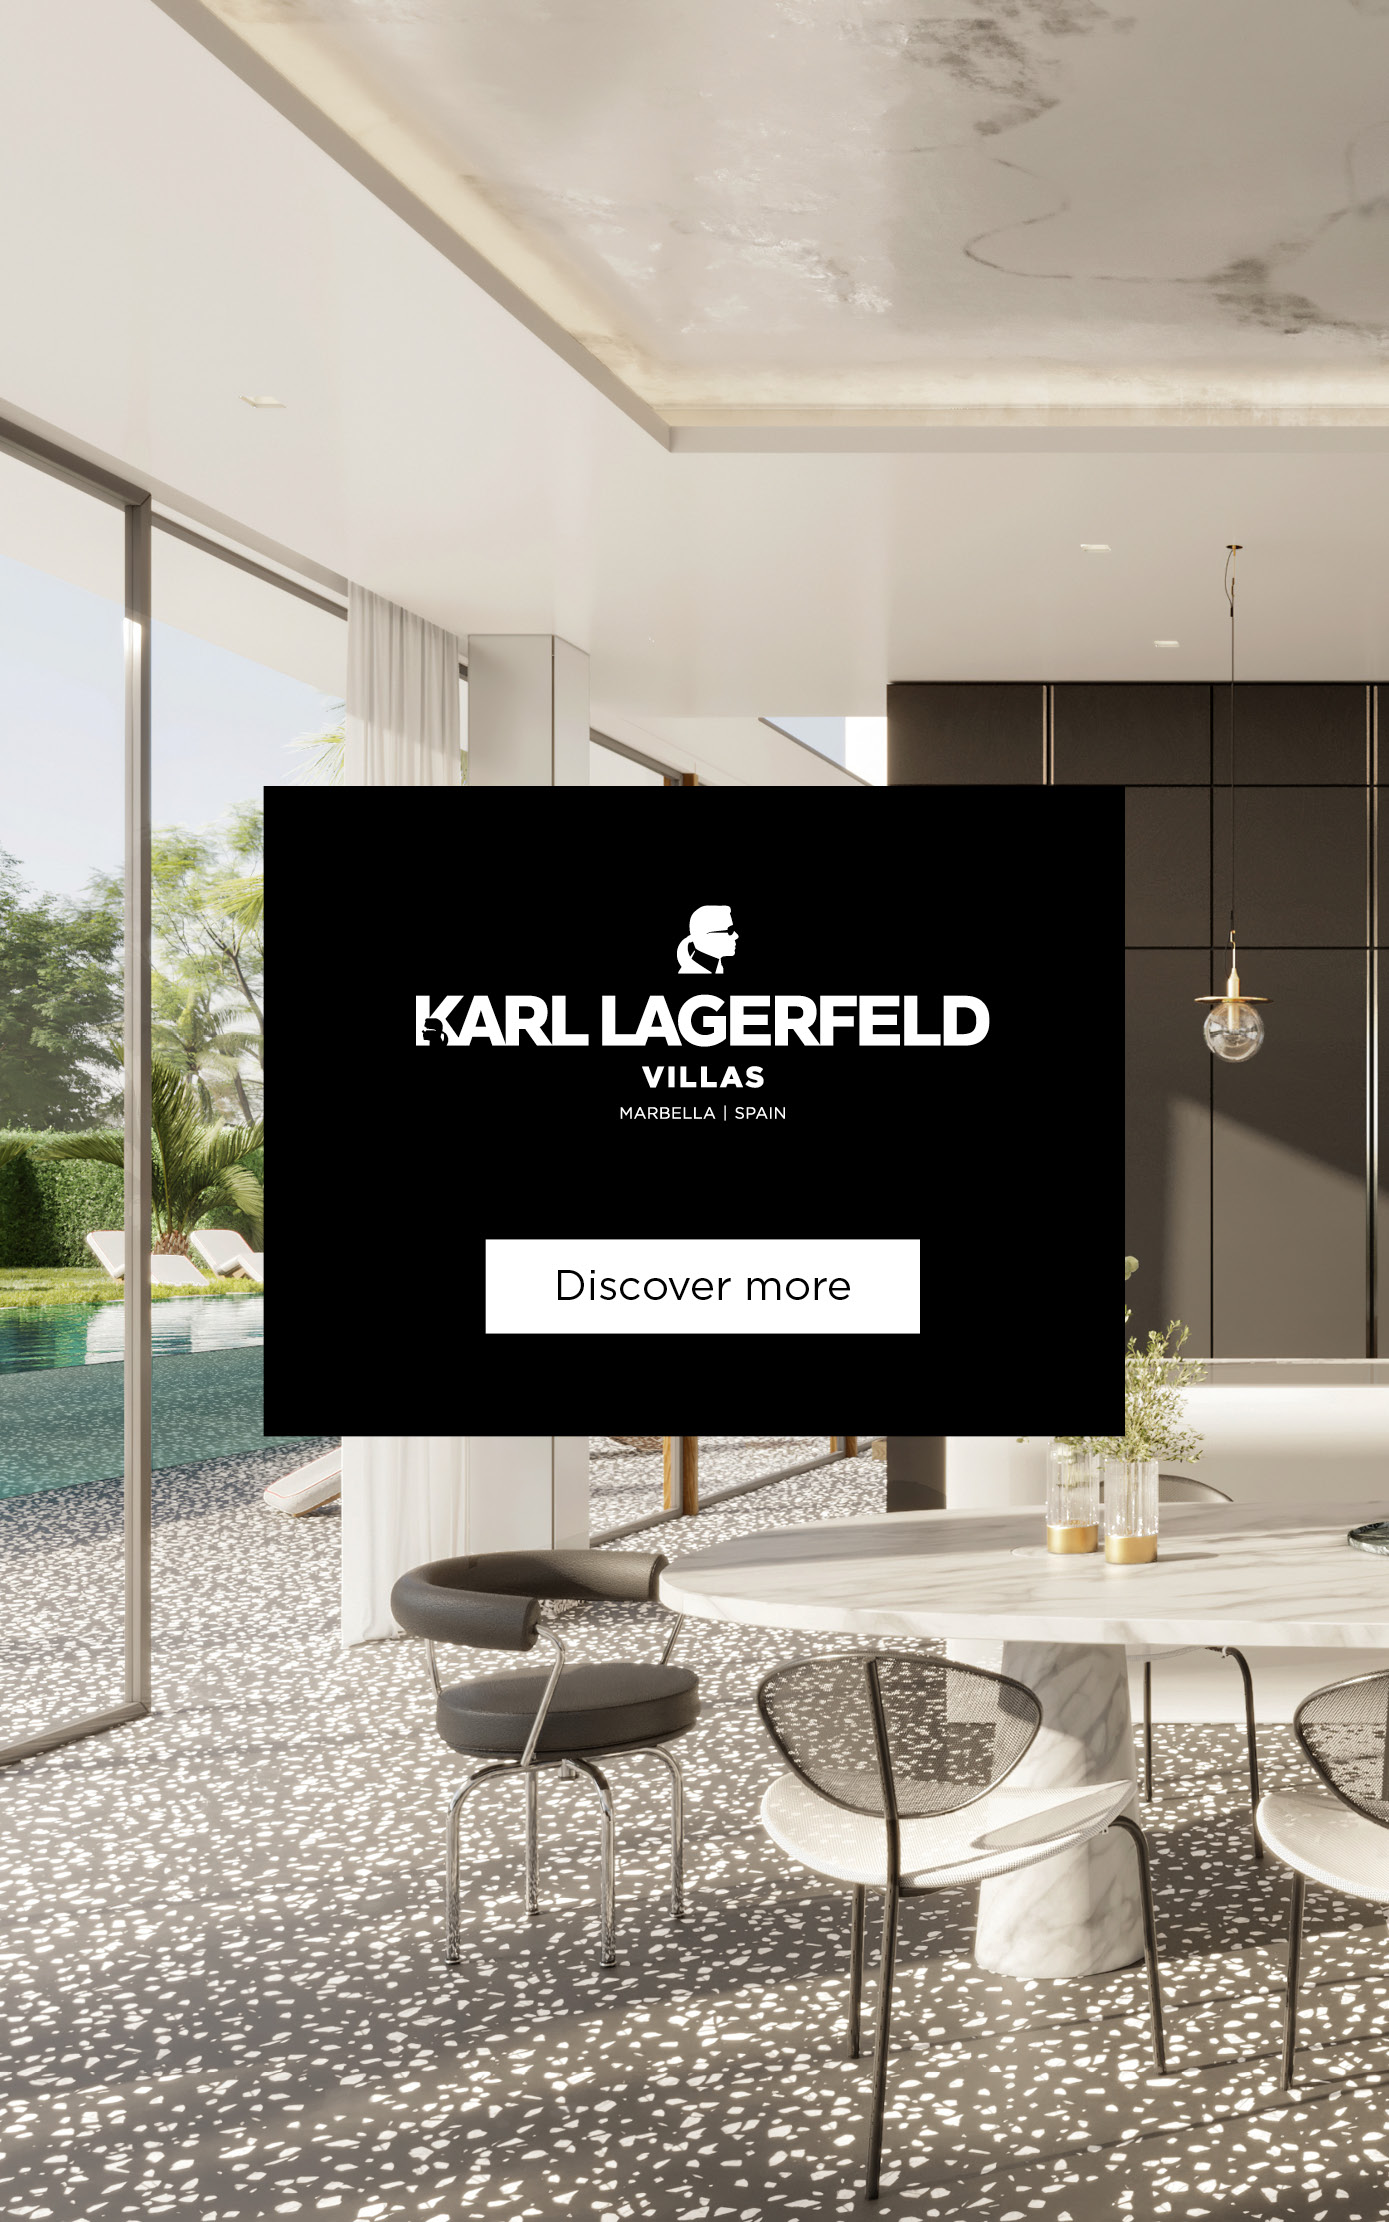 Five exclusive homes, perfectly integrated into the lush nature of Marbella’s Golden Mile. KARL LAGERFELD VILLAS stems from Karl’s passion for architecture, interior design and constantly pushing the envelope of innovation. The lifestyle-oriented environment harmoniously incorporates the local landscape through elevated architecture and a focus on sustainability.